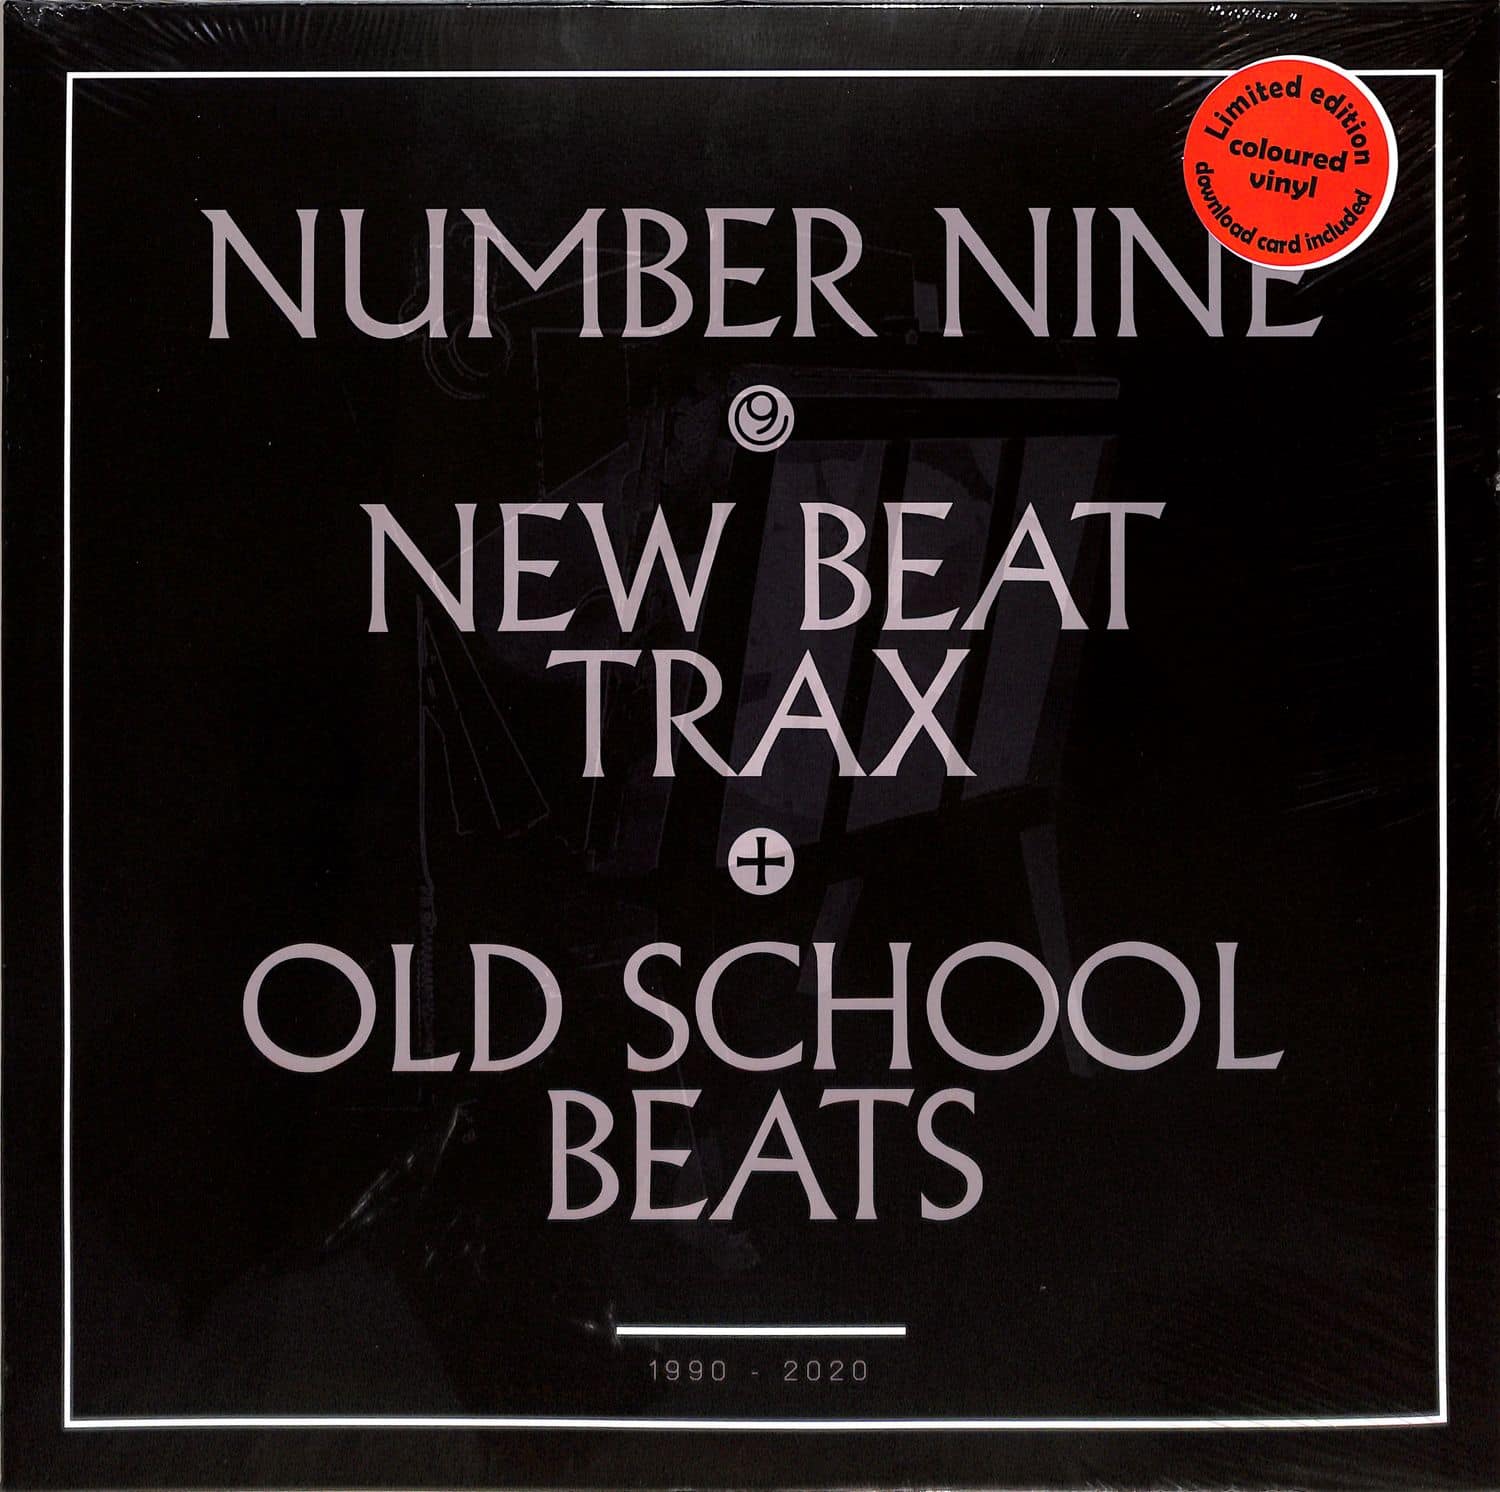 New Beat Trax + Old School Beats - A COMPILATION OF NUMBER NINE 